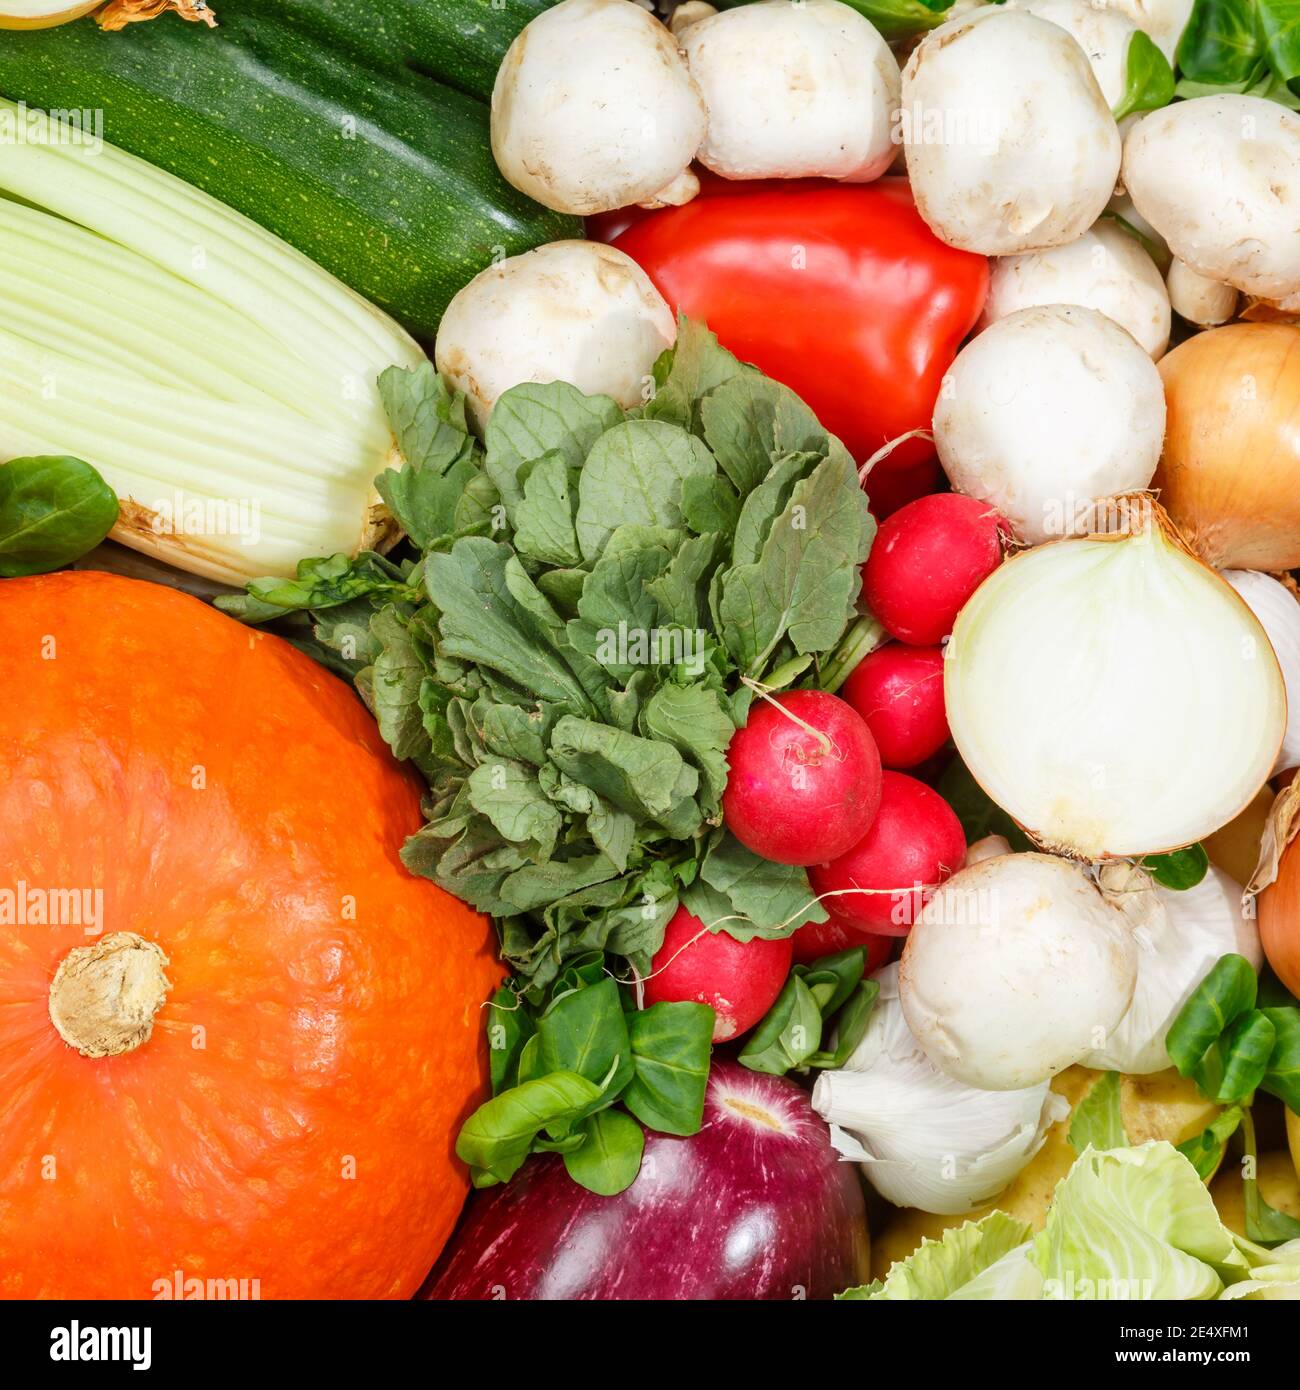 Vegetables background food collection pattern square pumpkin onions mushrooms vegetable backgrounds Stock Photo